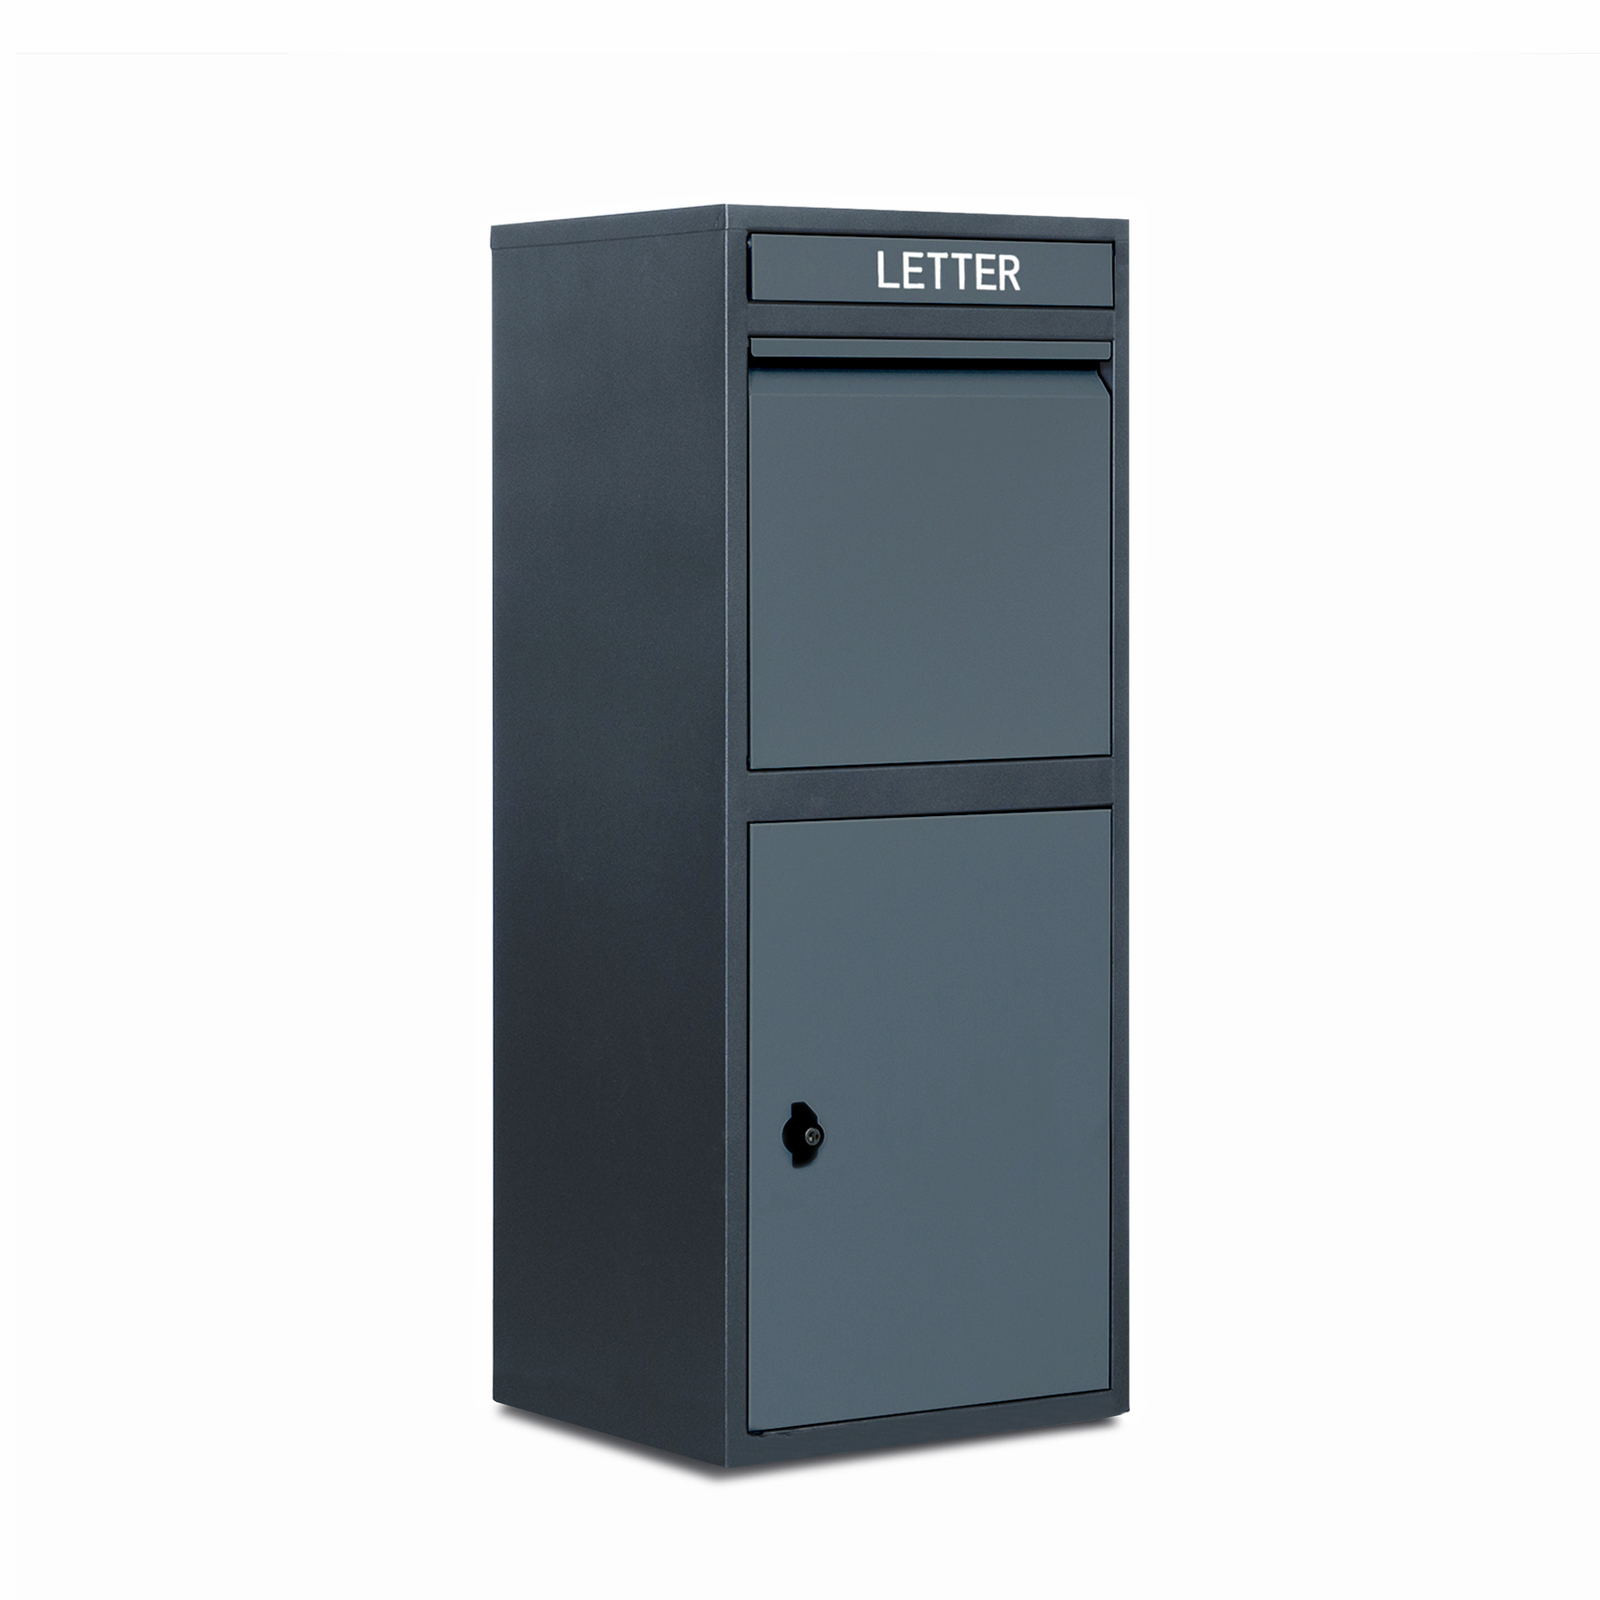 Steel Post Parcel Box Package Delivery Mail Box Locking Safe Drop Letterbox Storage Black